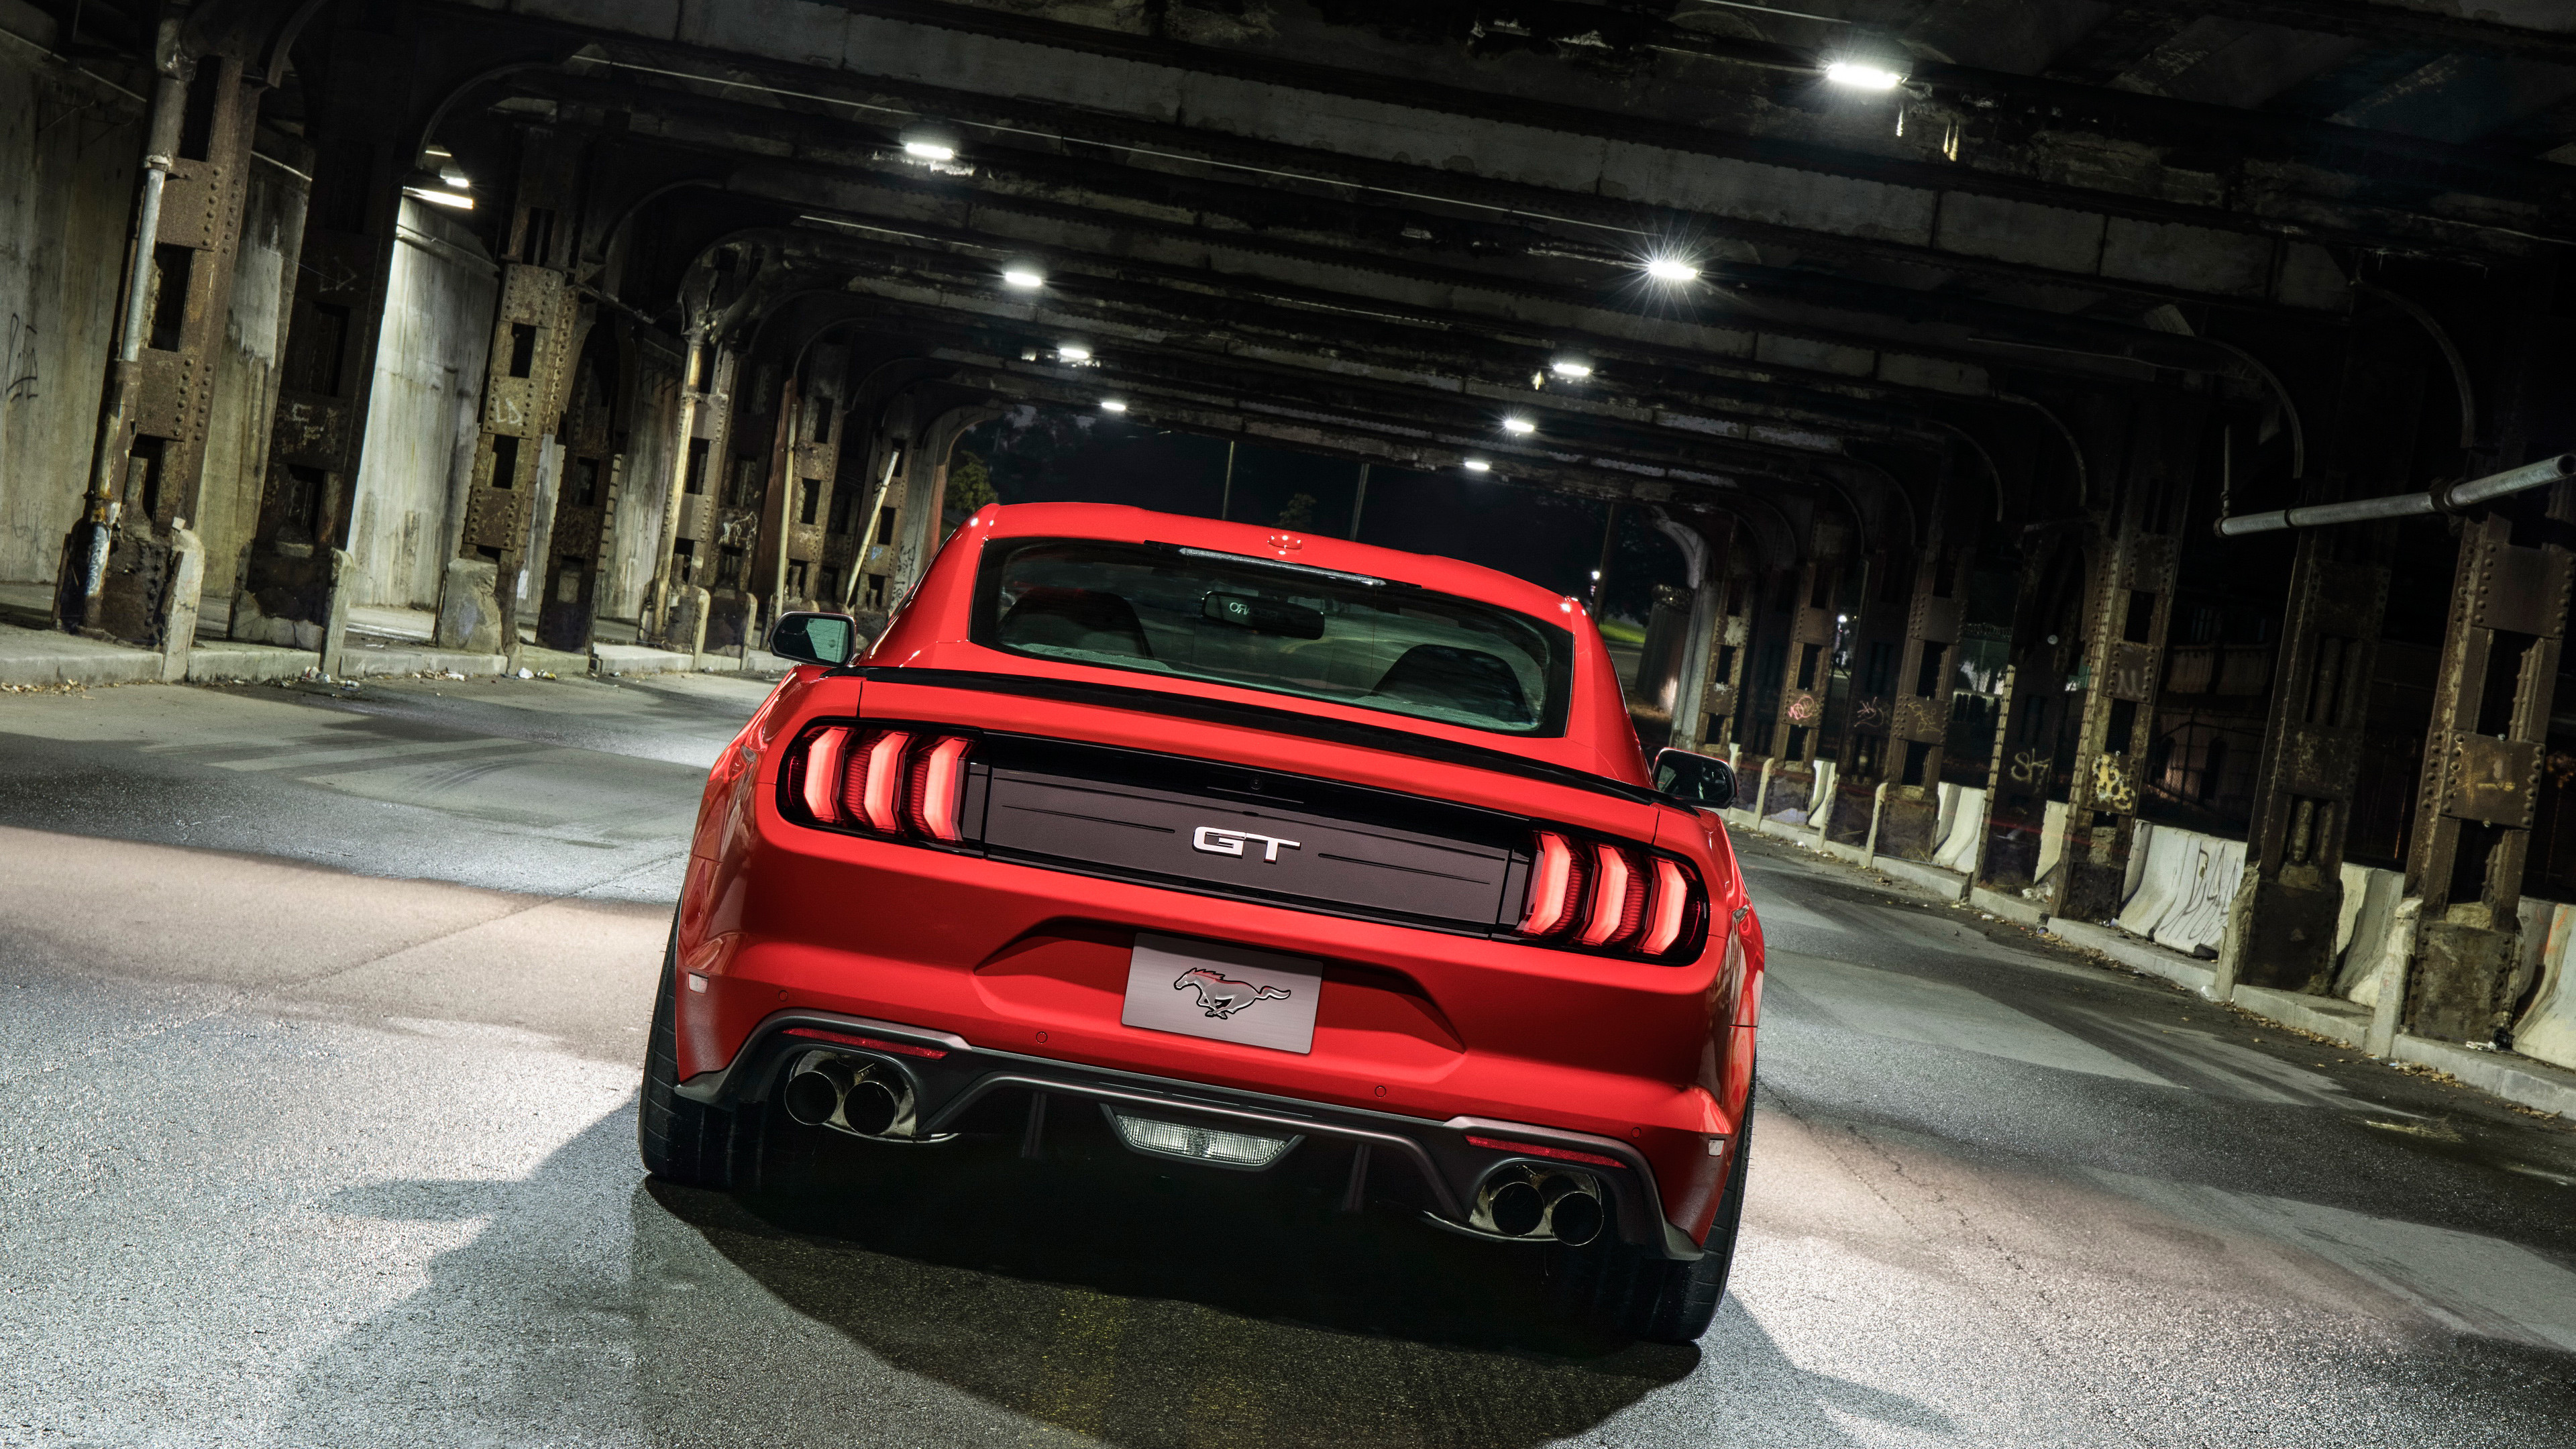 3840x2160 2018 Ford Mustang Gt Level 2 Performance 2018 Mustang Gt Tail Lights 3840x2160 Wallpaper Teahub Io